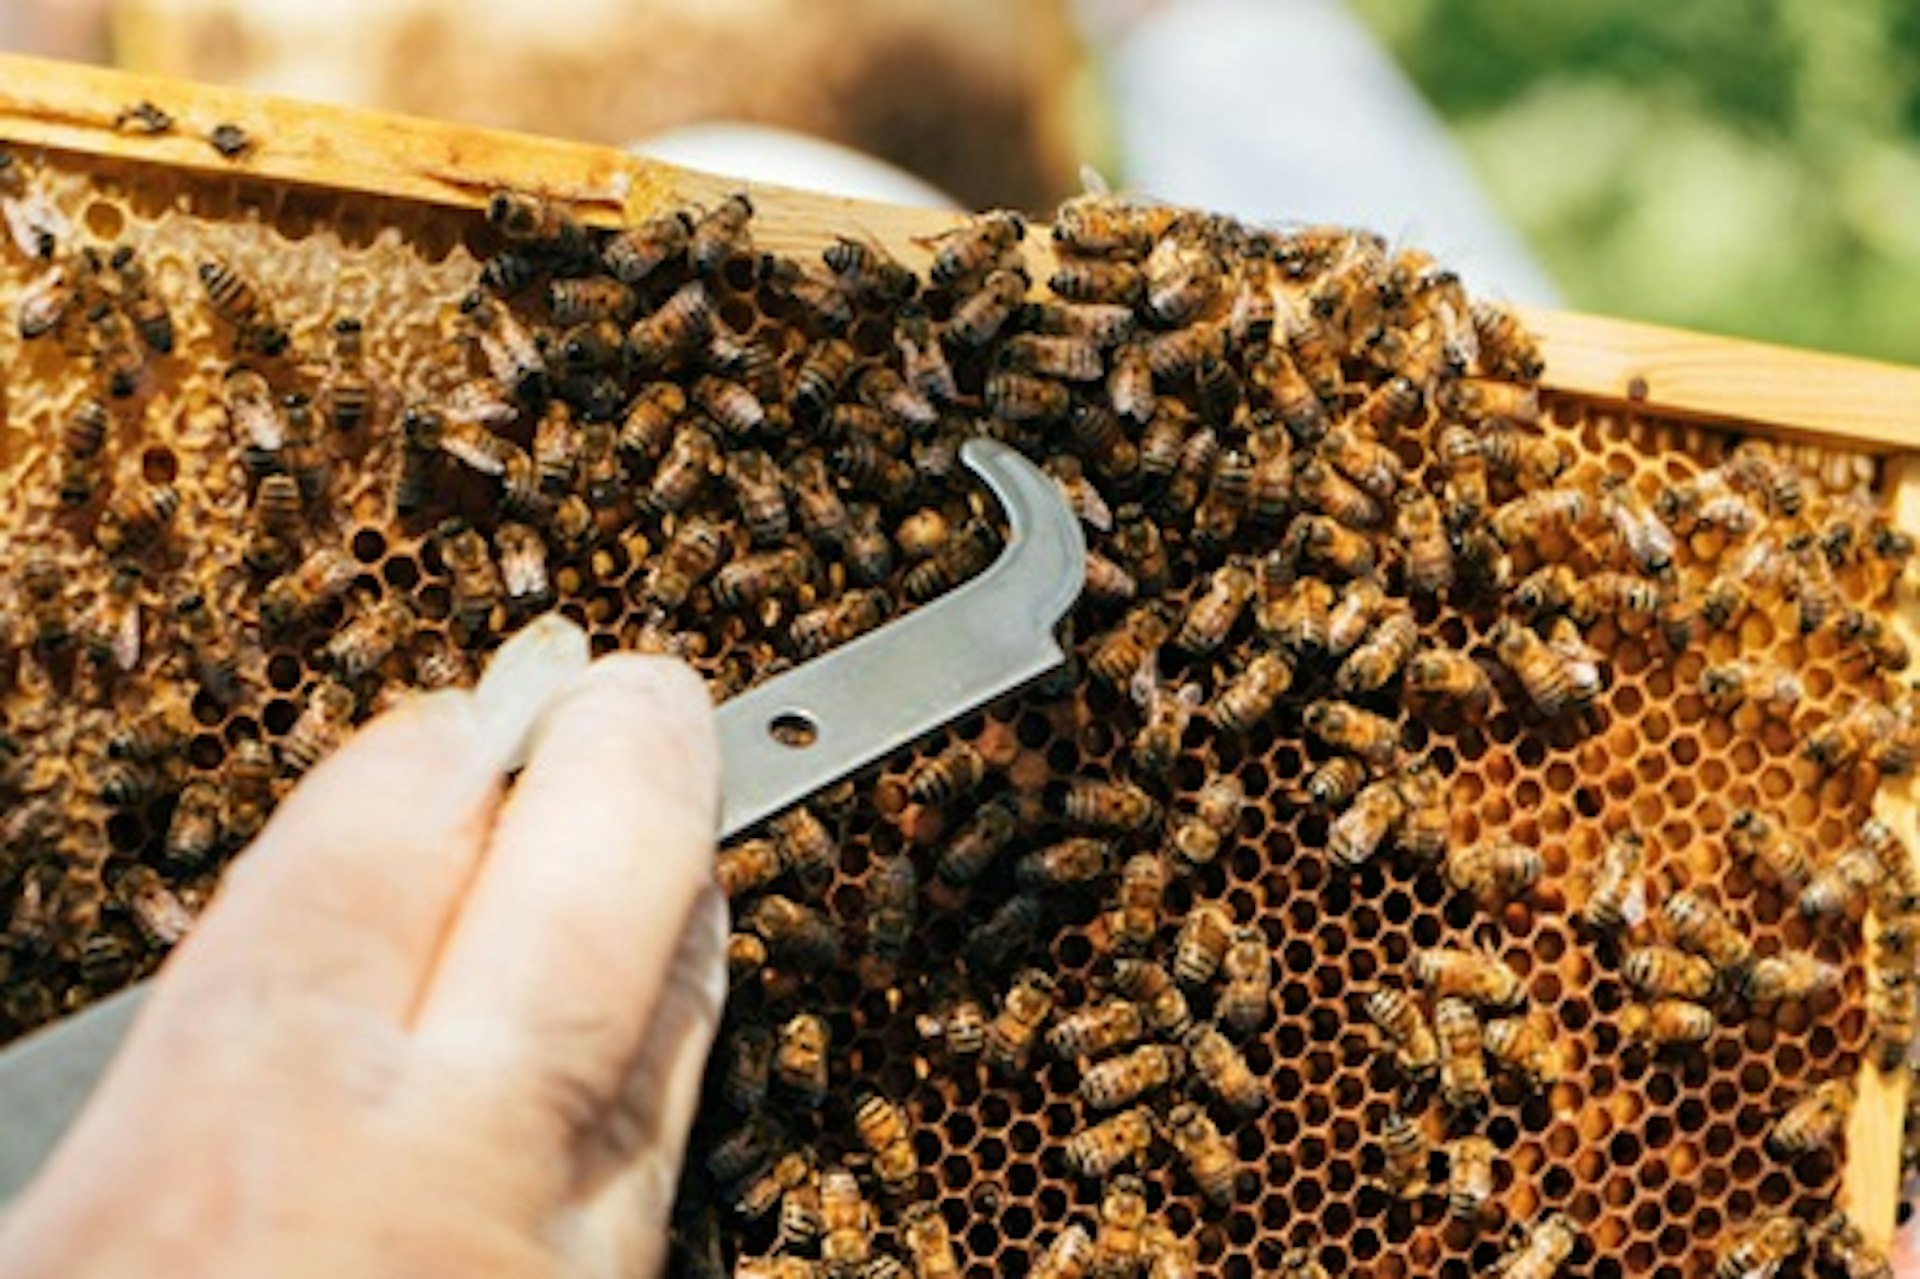 Urban Beekeeping and Honey Craft Beer Tasting for Two 2